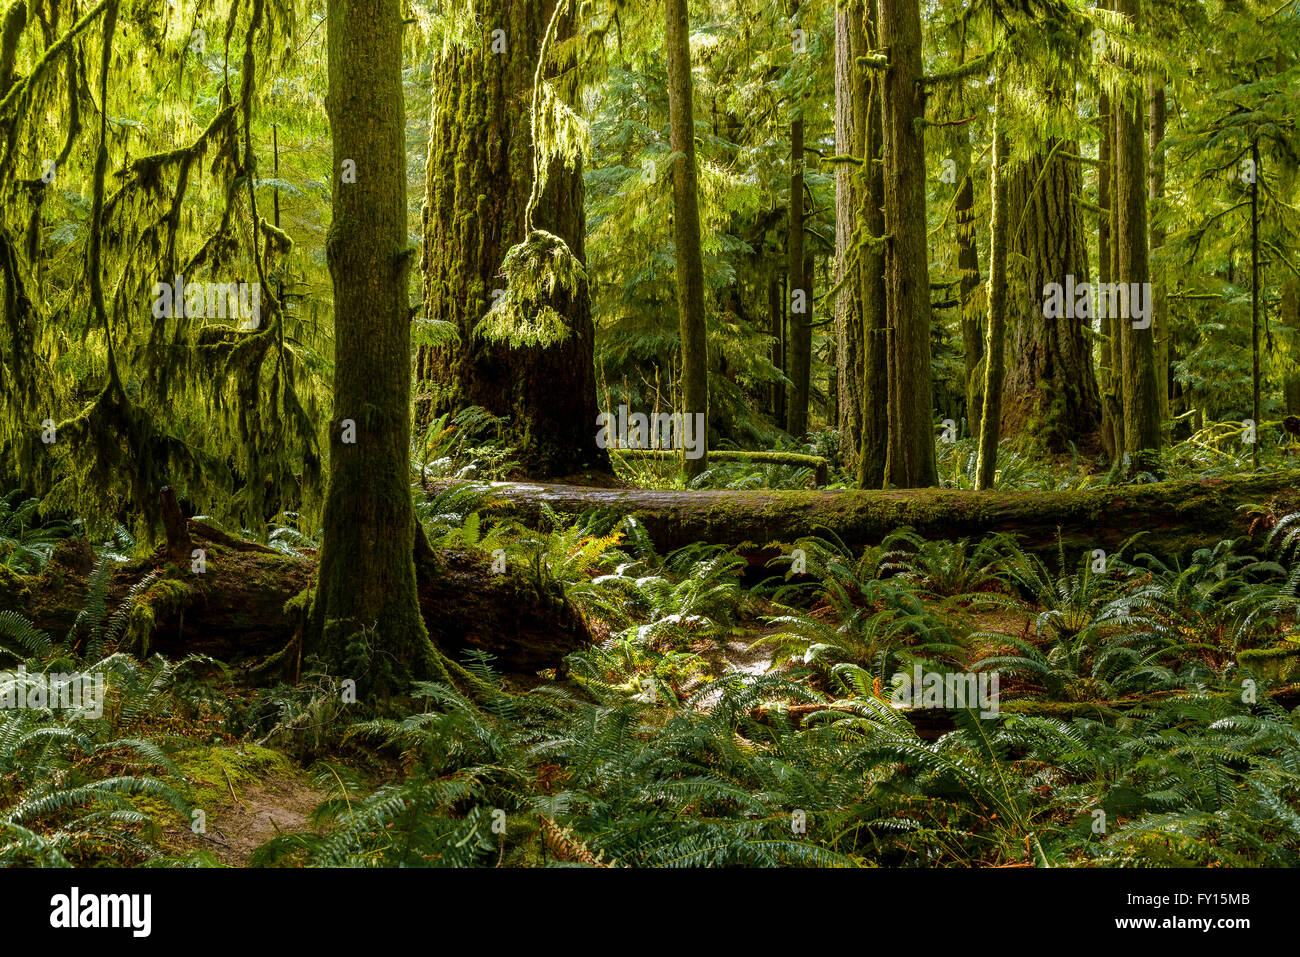 Old growth rainforest, Cathedral Grove, MacMillan Provincial Park, British Columbia, Canada Stock Photo